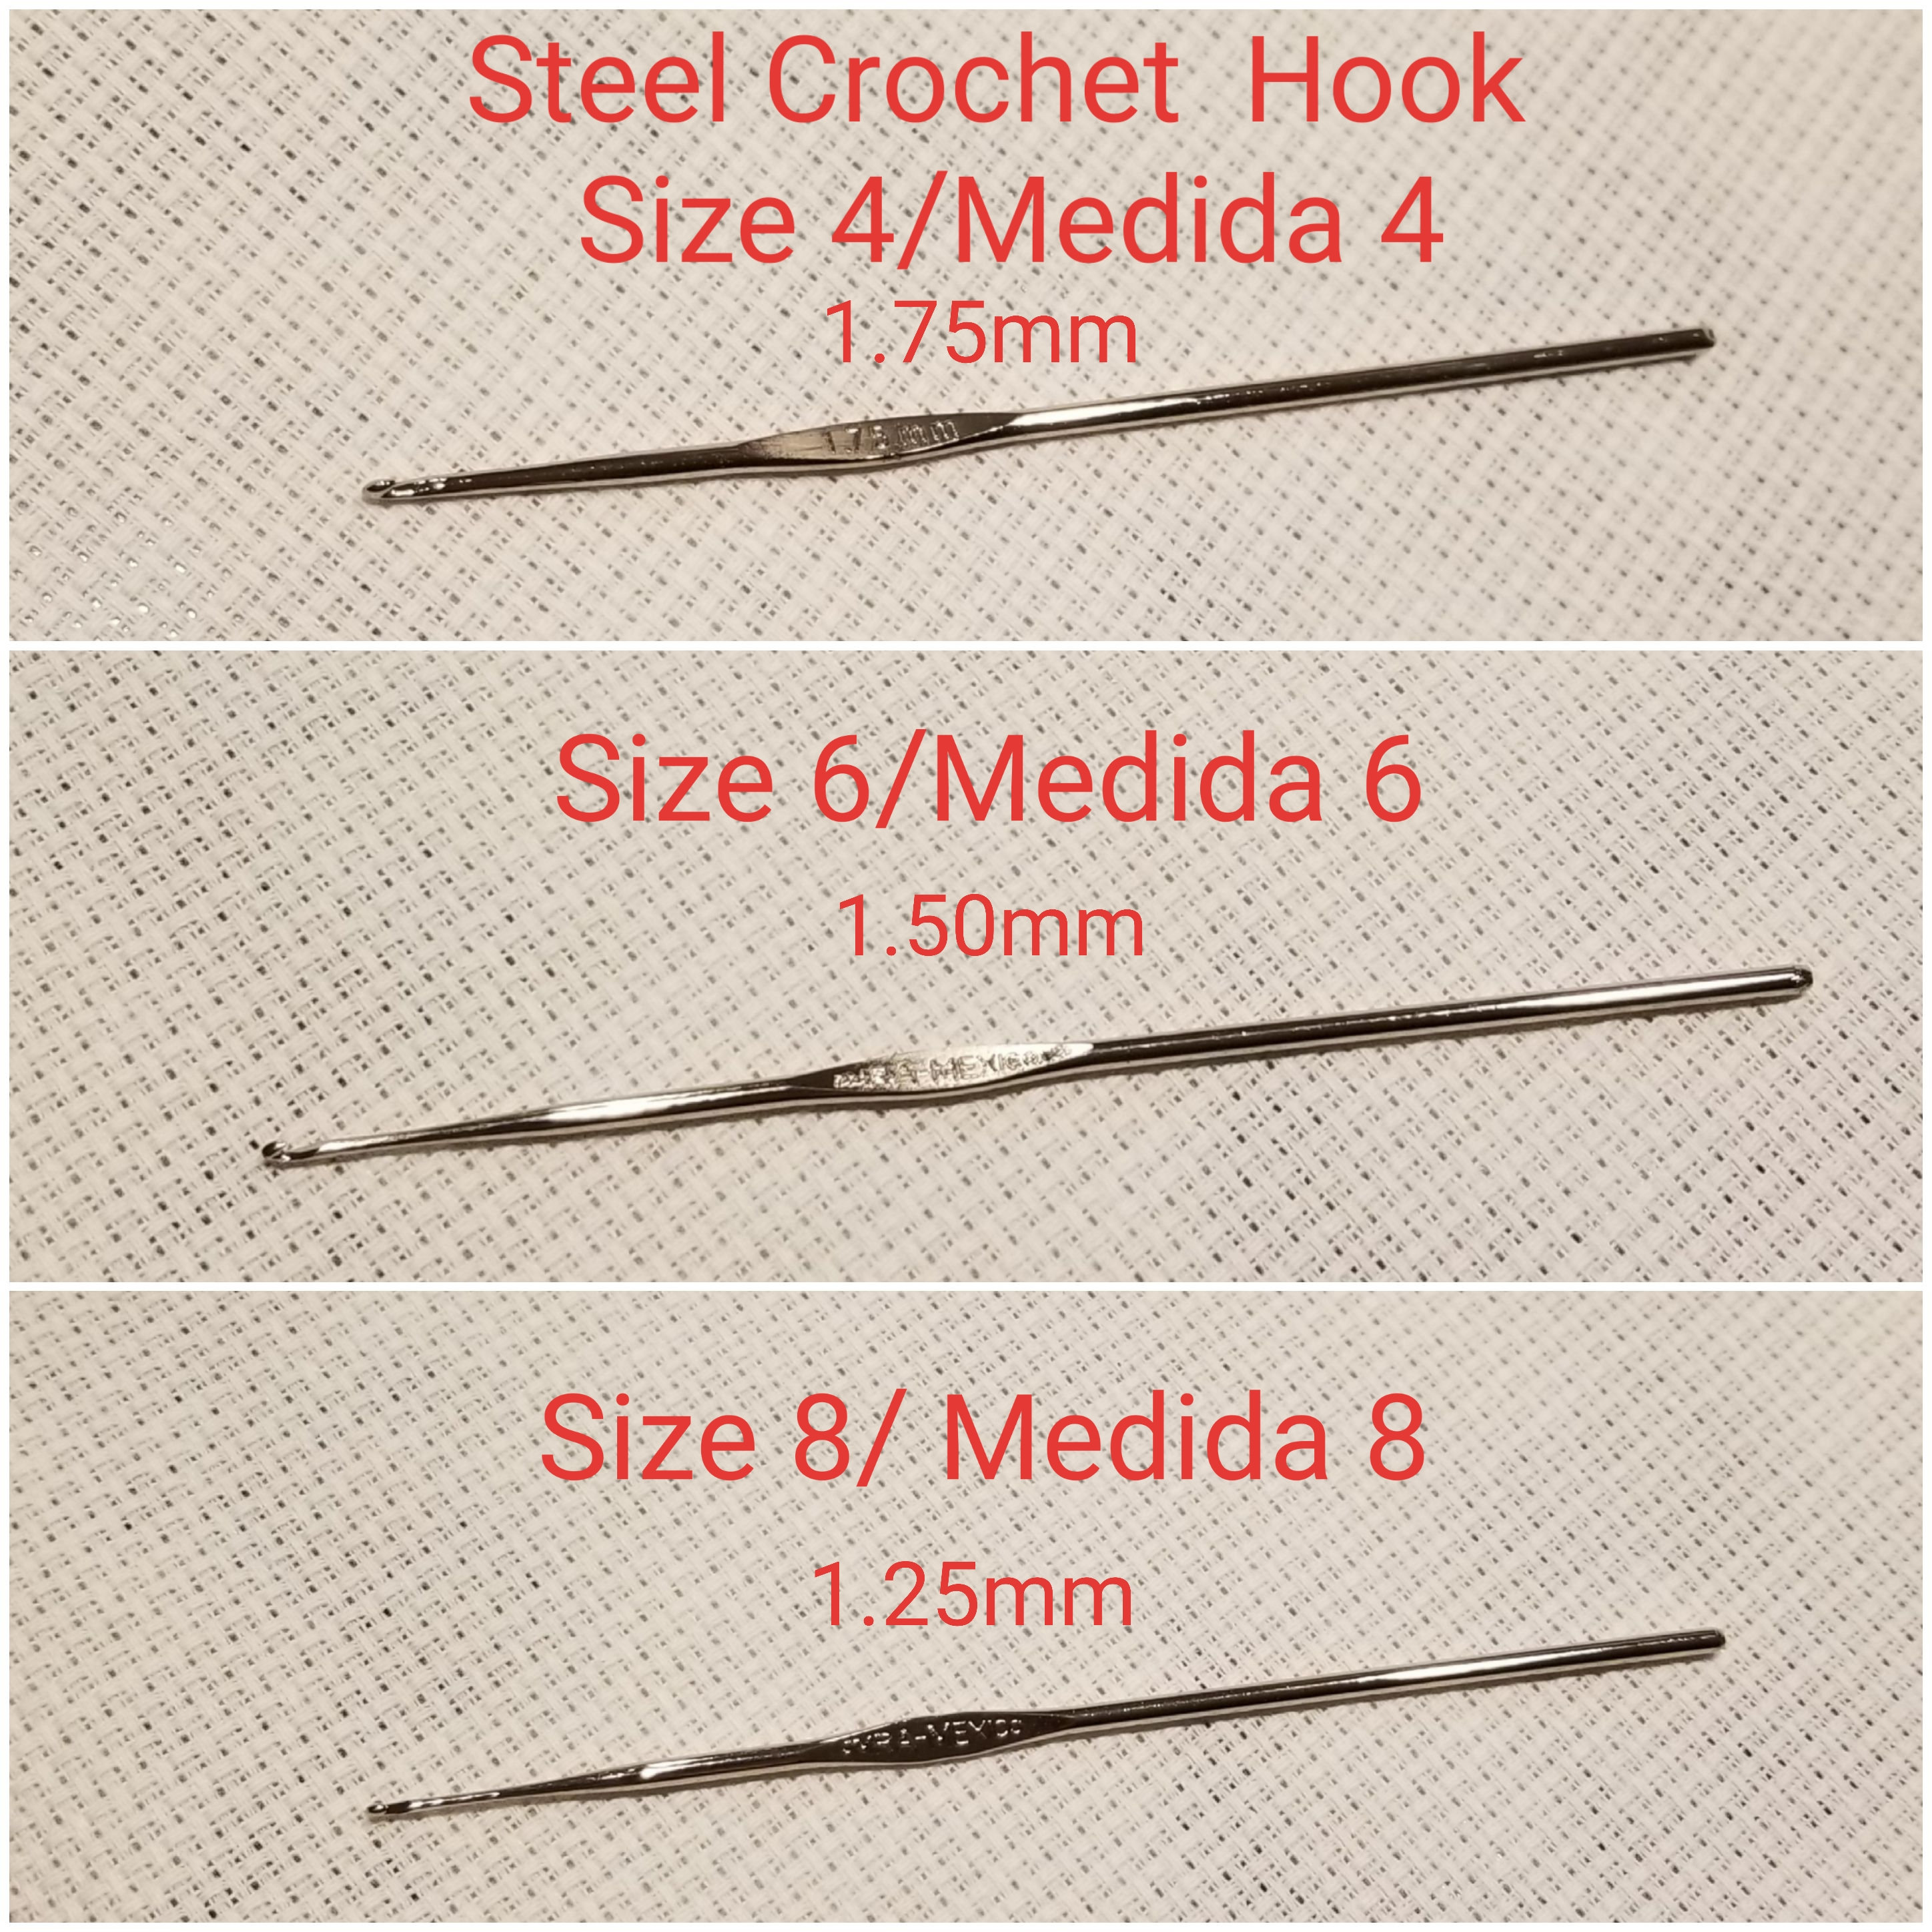 SOFT TOUCH STEEL Clover Crochet hooks. Ergonomic soft grip for fine threads  and jewelry making. Available in 8 sizes 0-14 (1.75mm-.5mm)